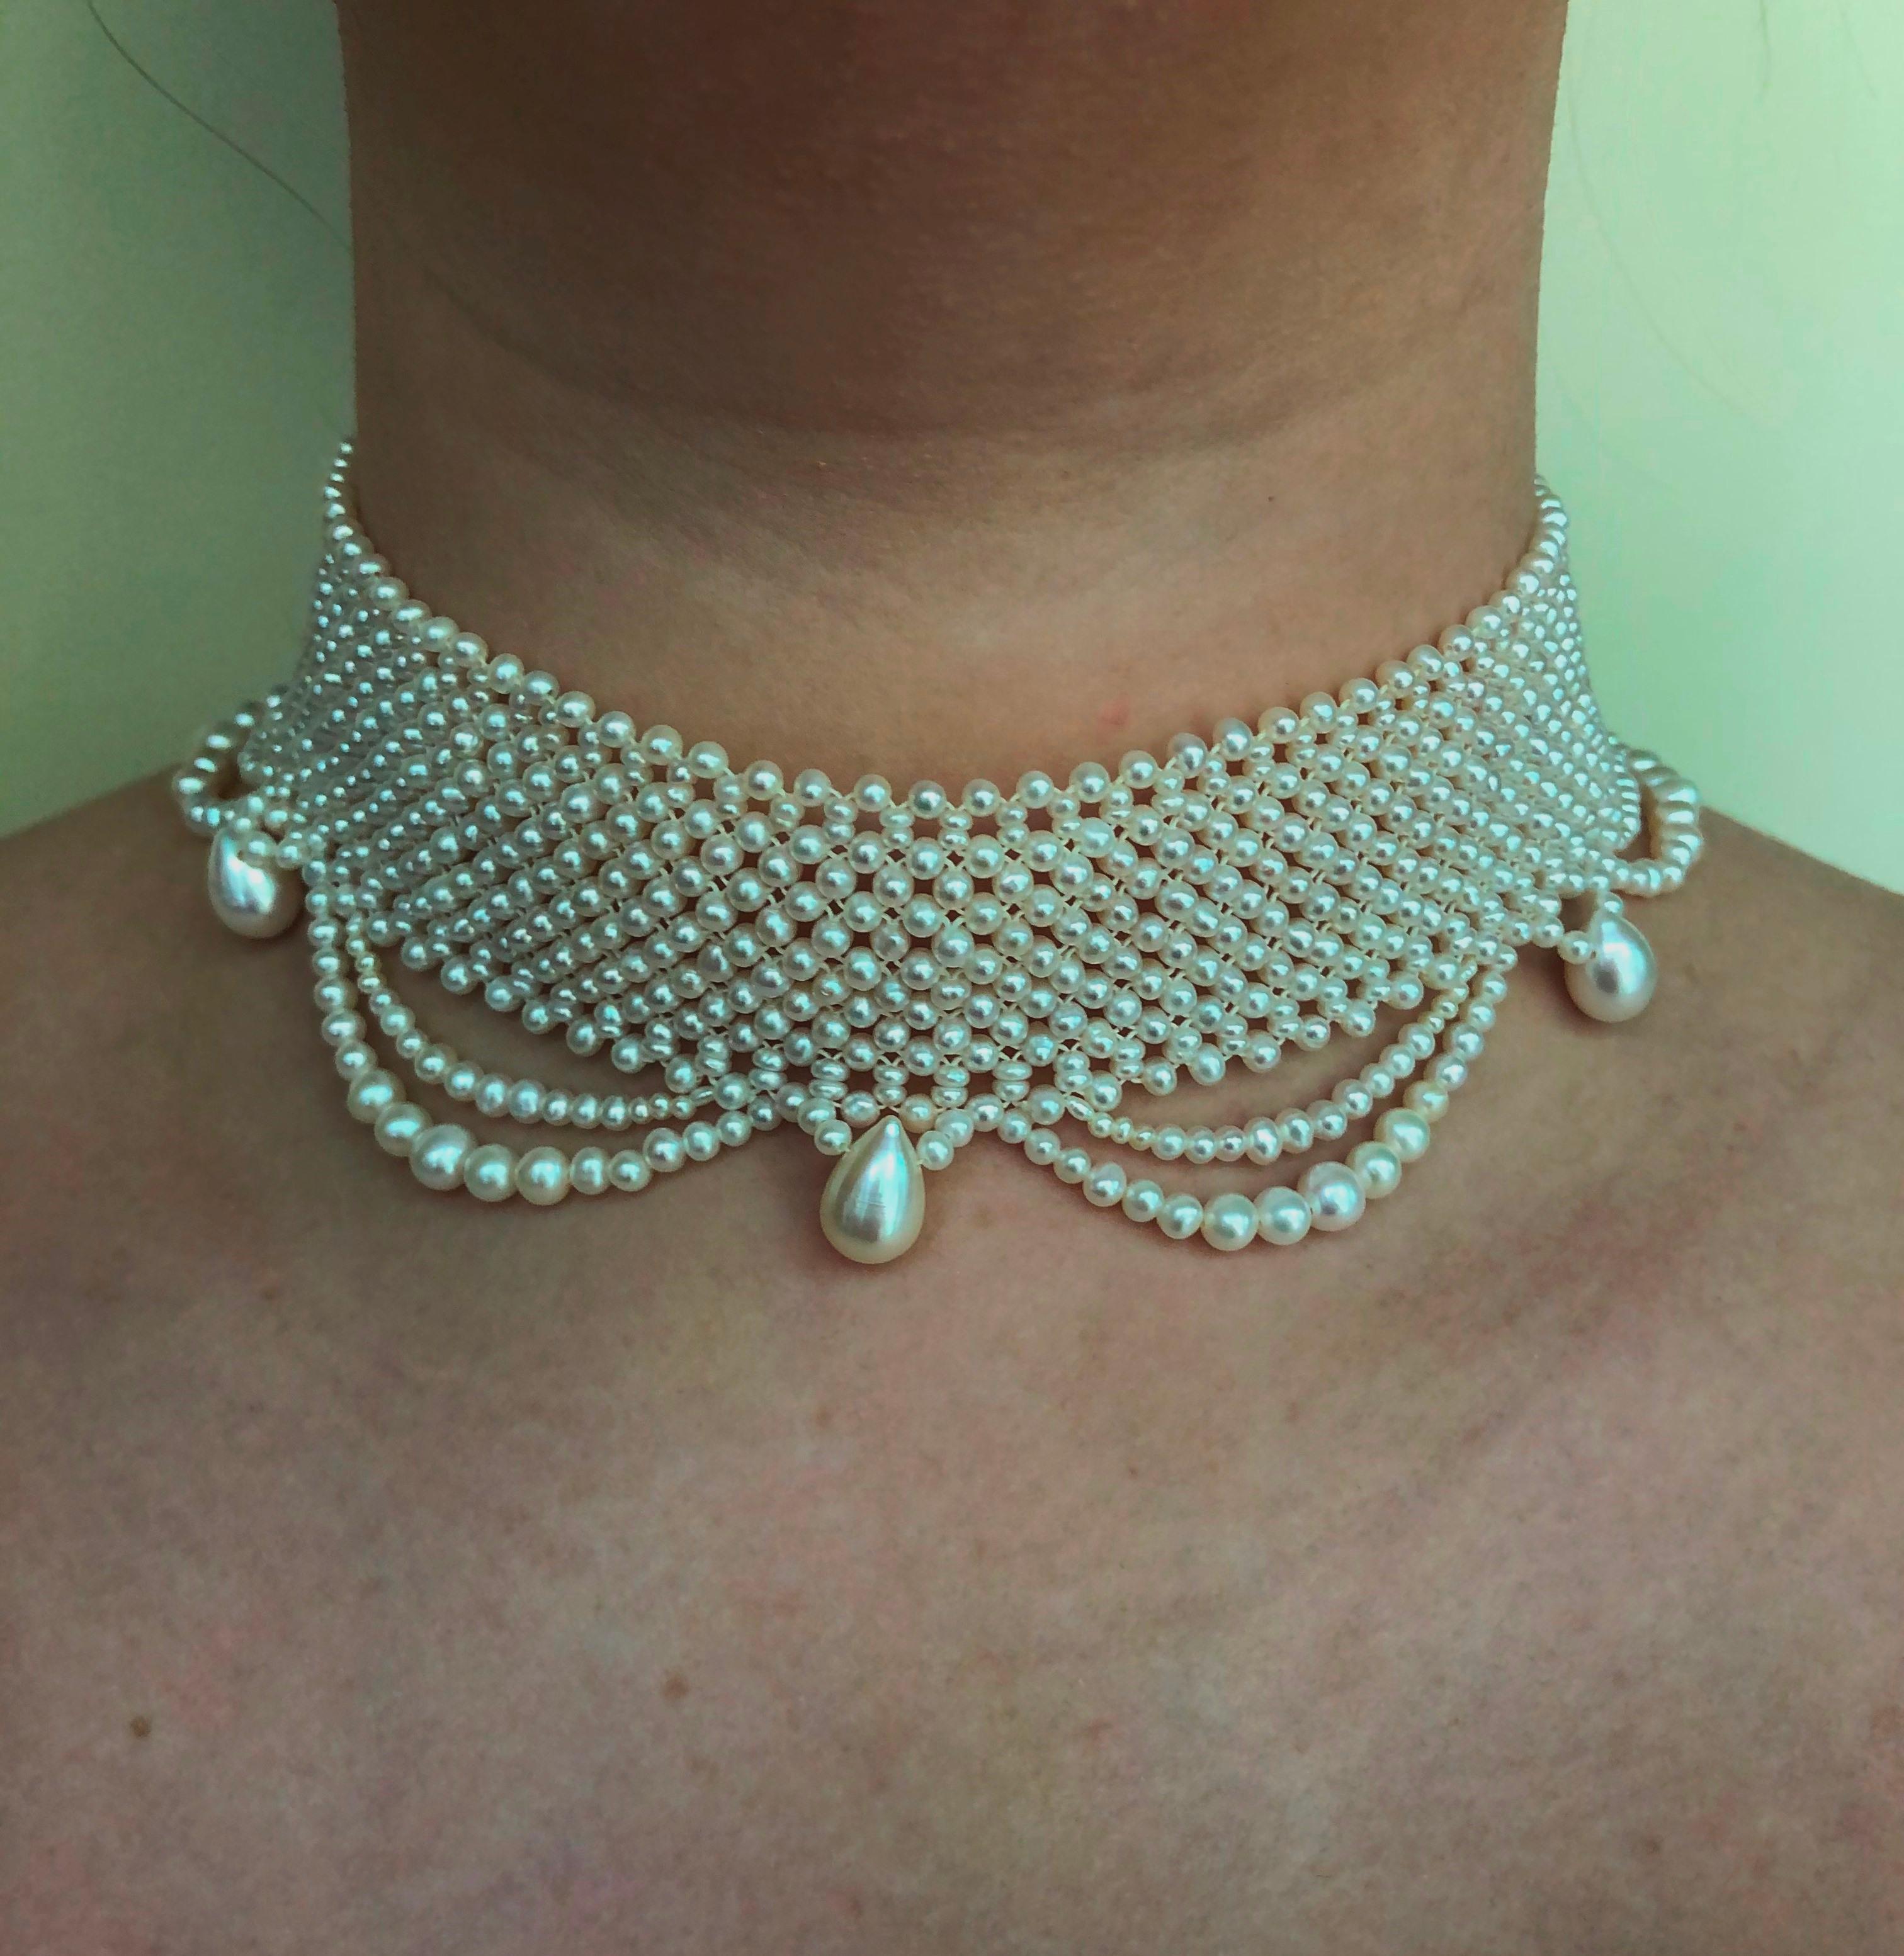 This beautiful handwoven pearl choker has pearls from 2.5mm to 3mm. The necklace is intricately handwoven to create a “lacelike” design.  The Choker is tapered in design to fit along the curve of the neckline. The clasp is made of rhodium plated